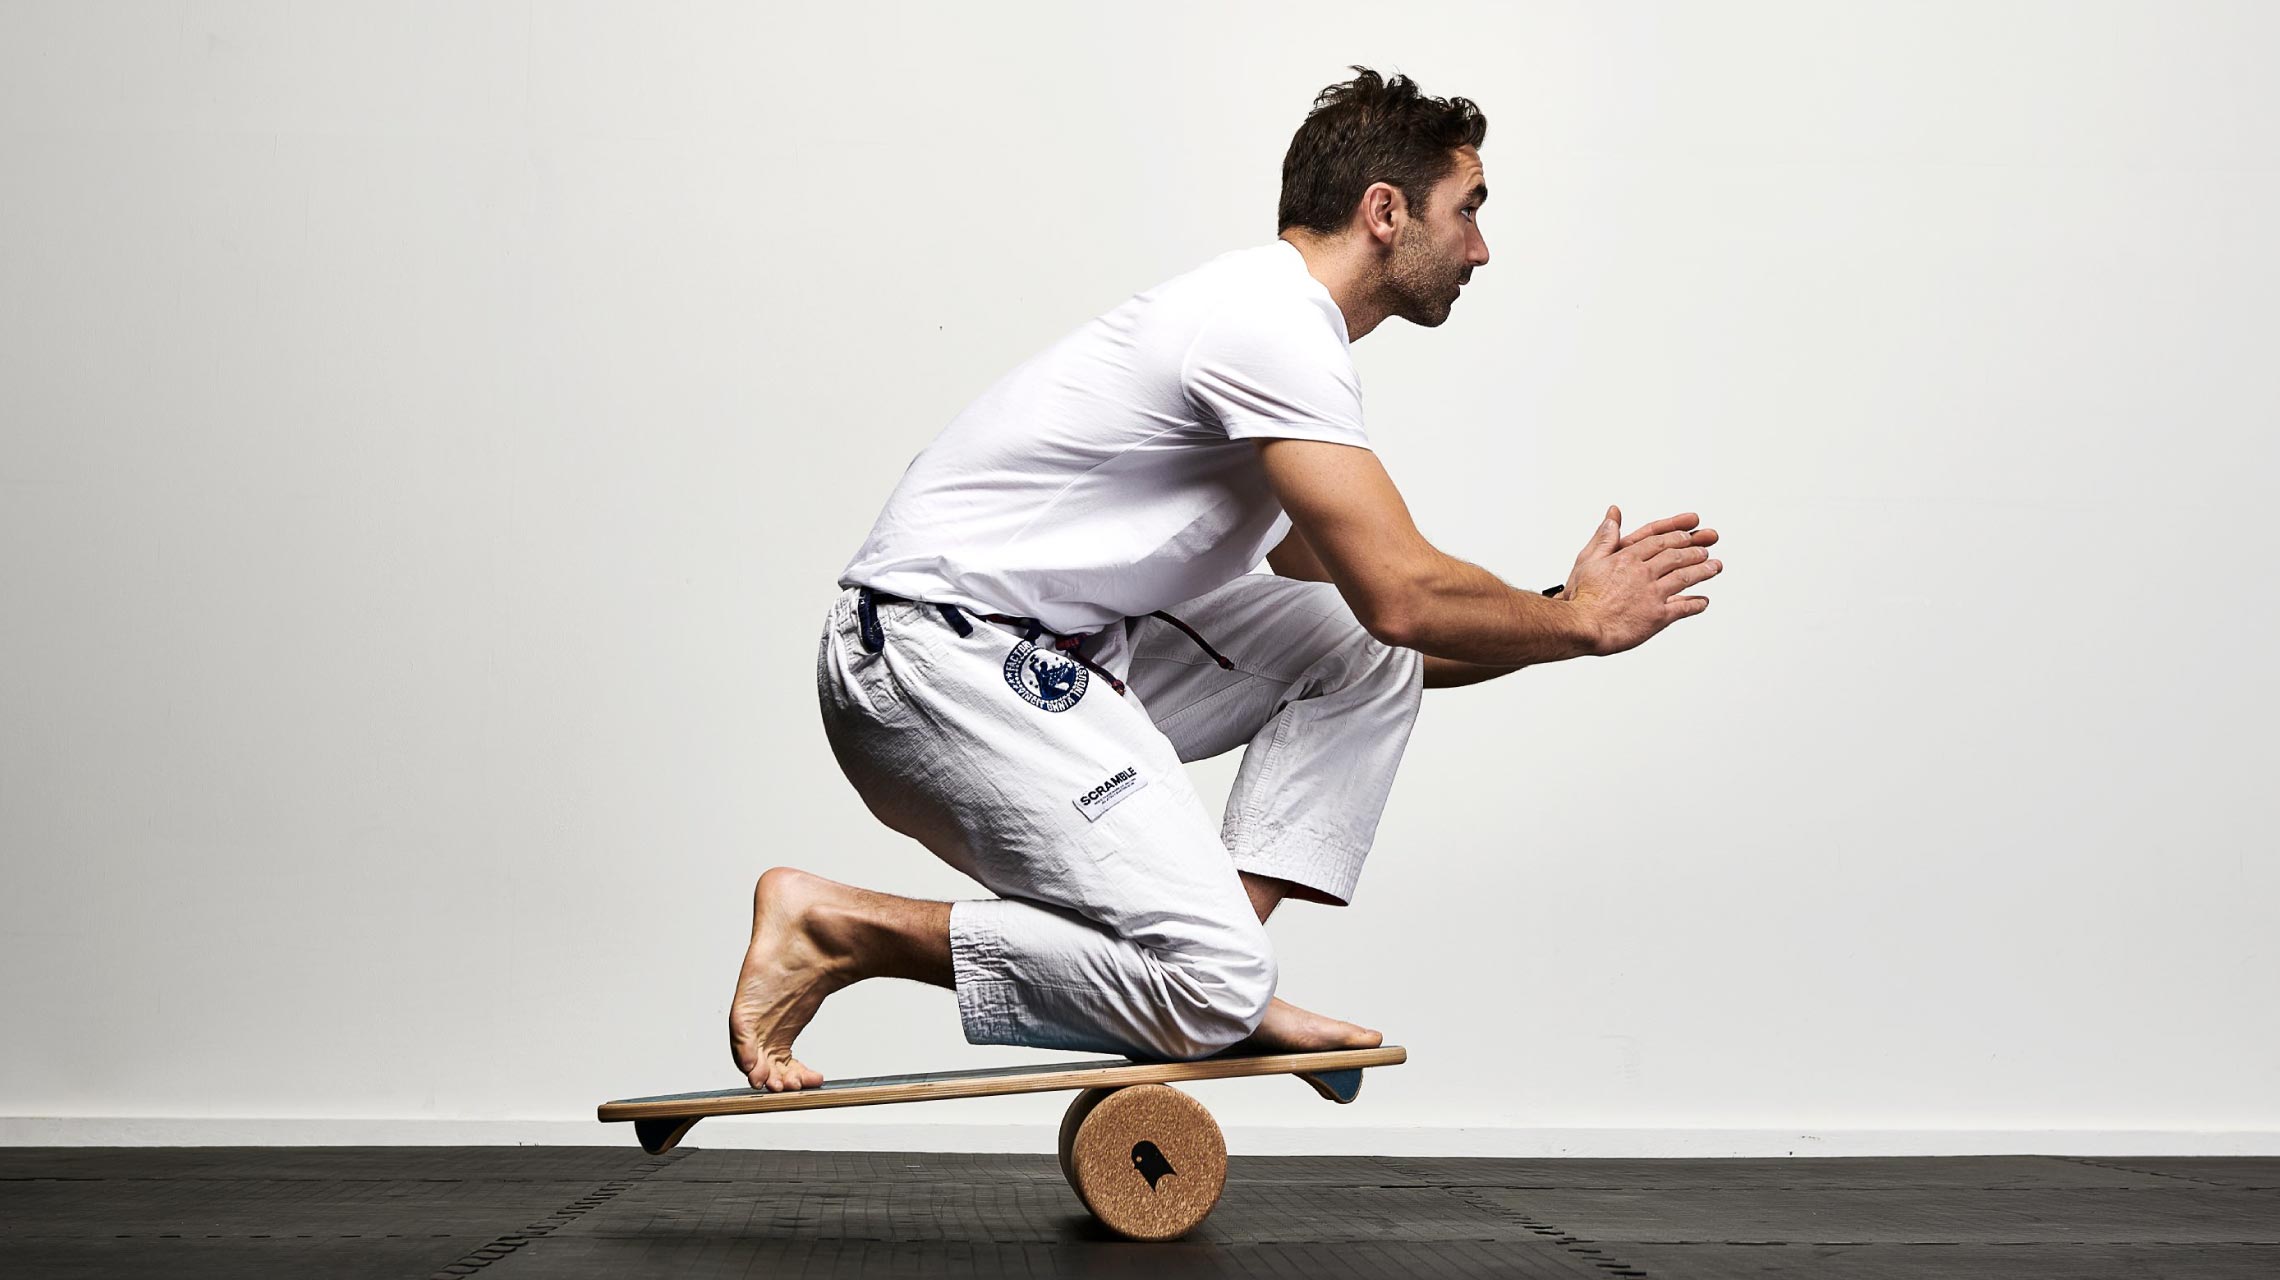 Swifty Balance Board - VARIABLE FITNESS FOR ALL LEVELS